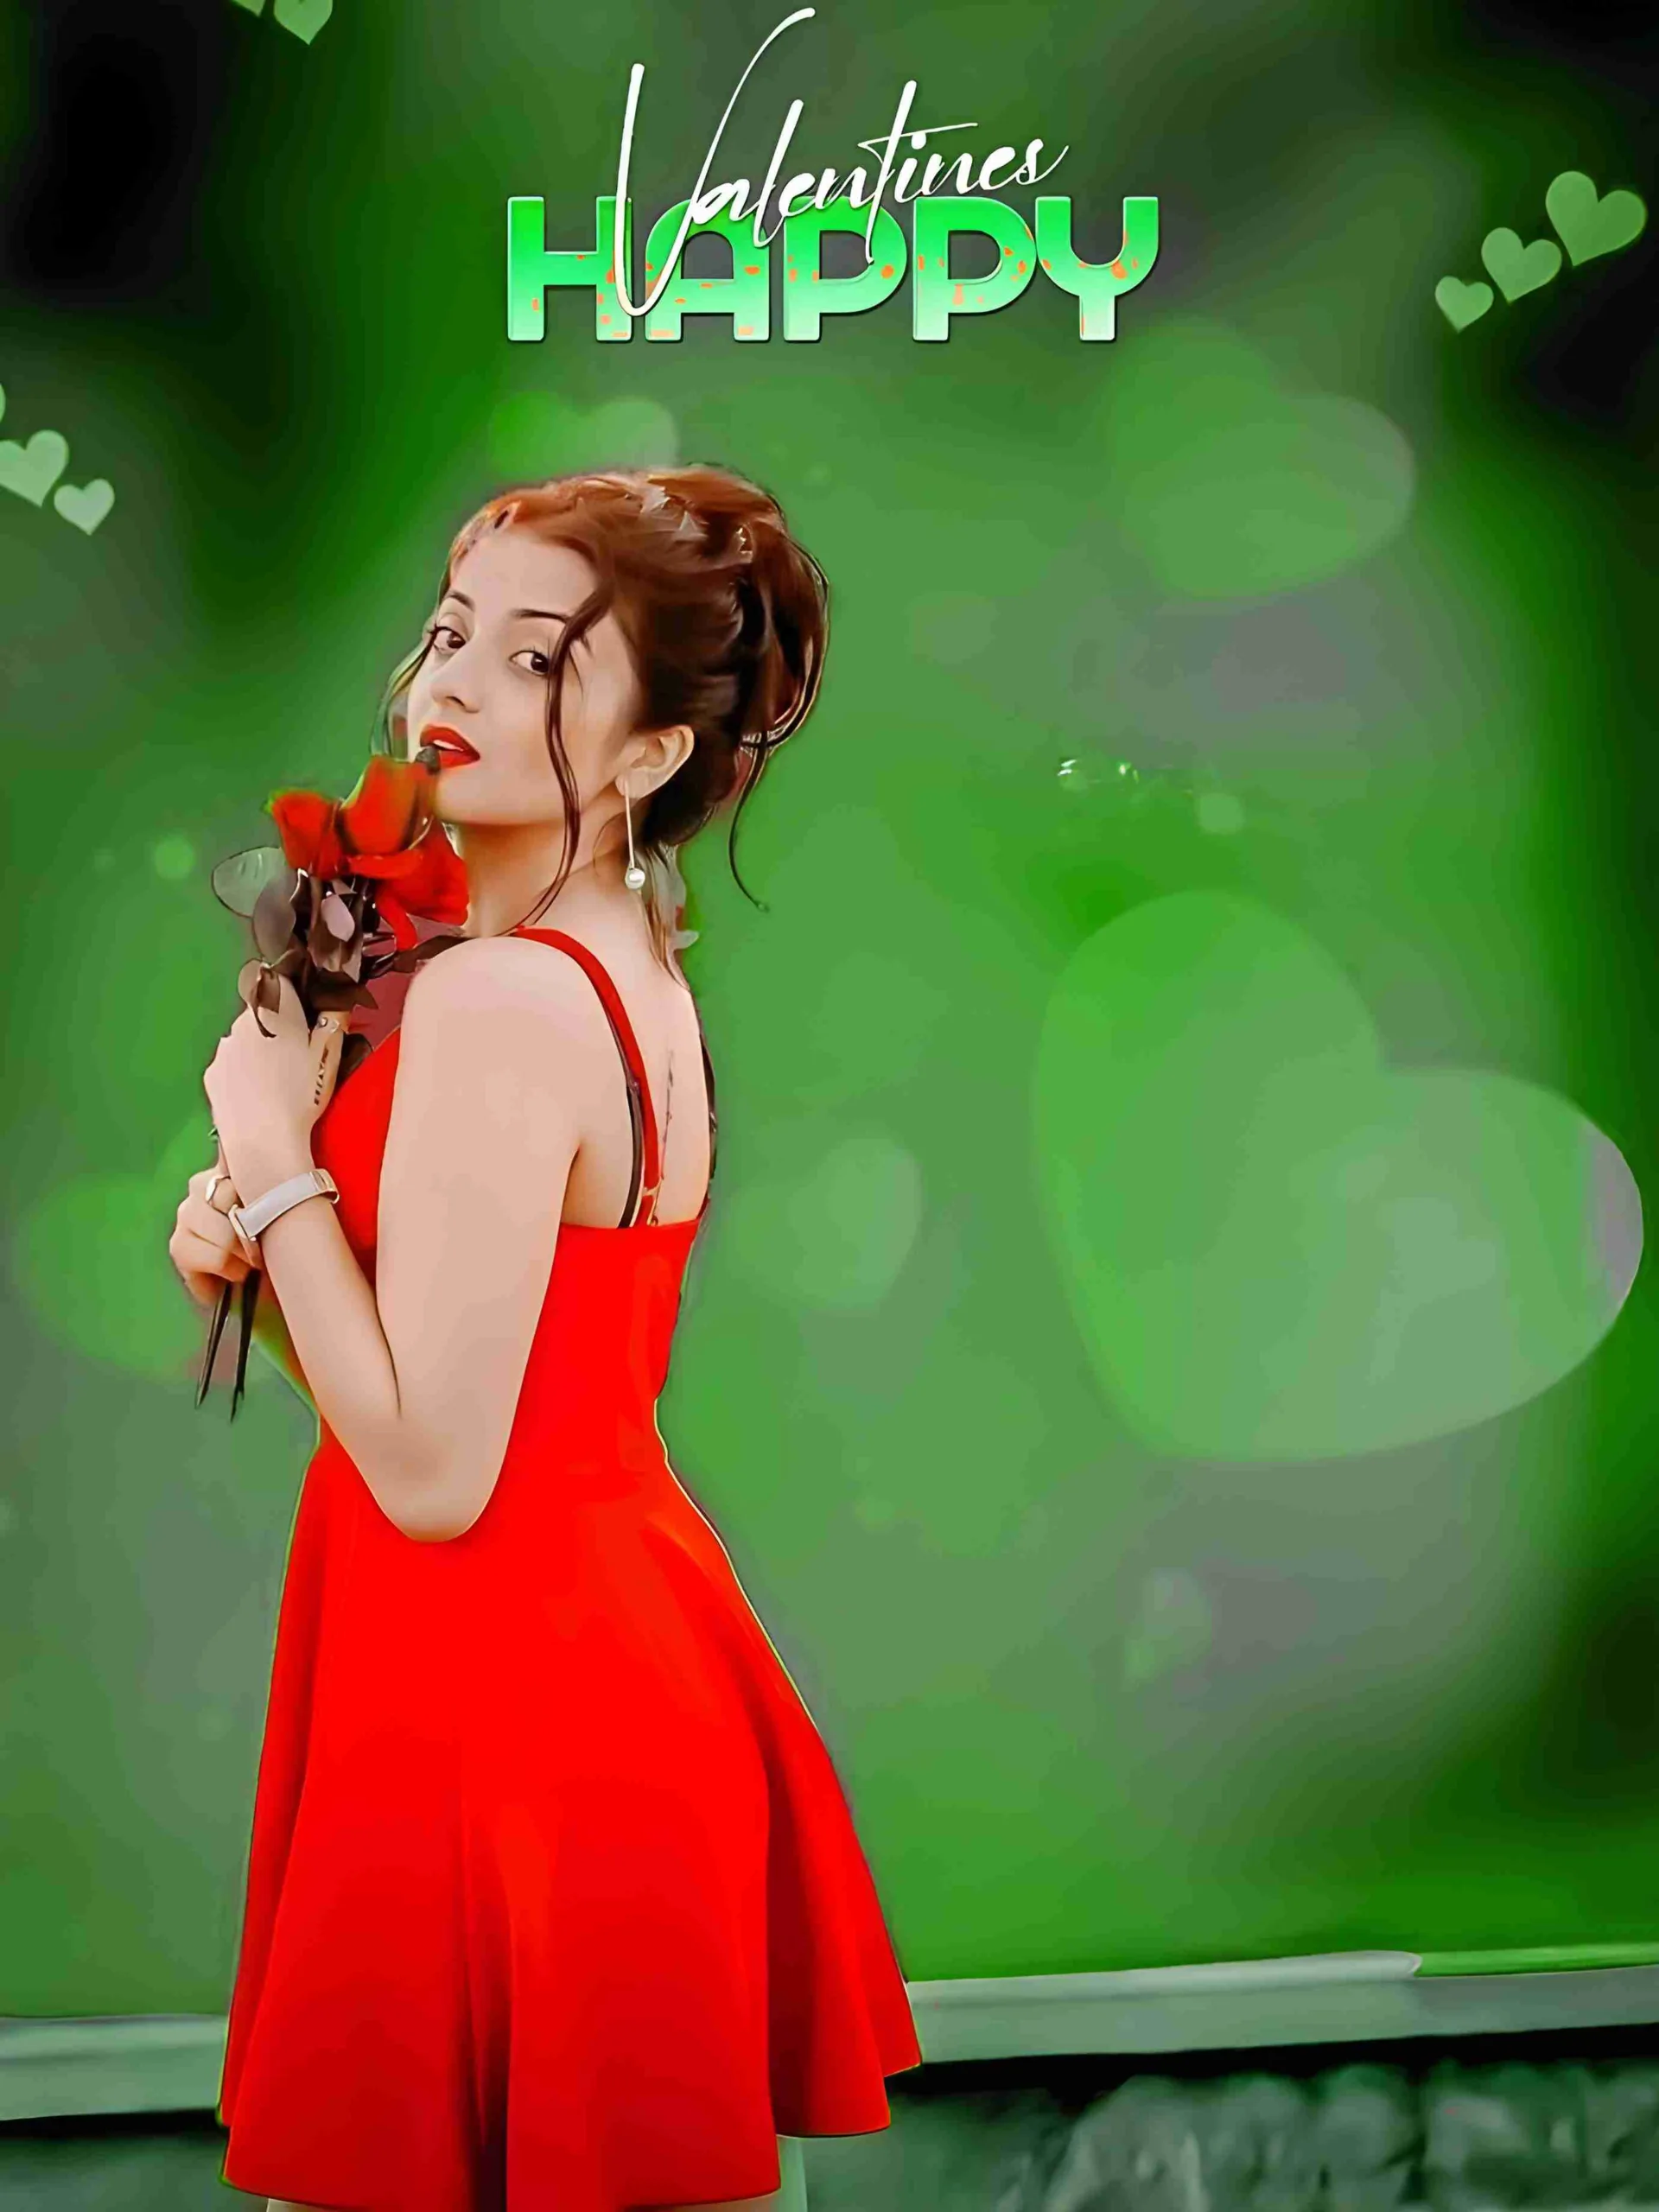 Rose Day Editing Background PicsArt